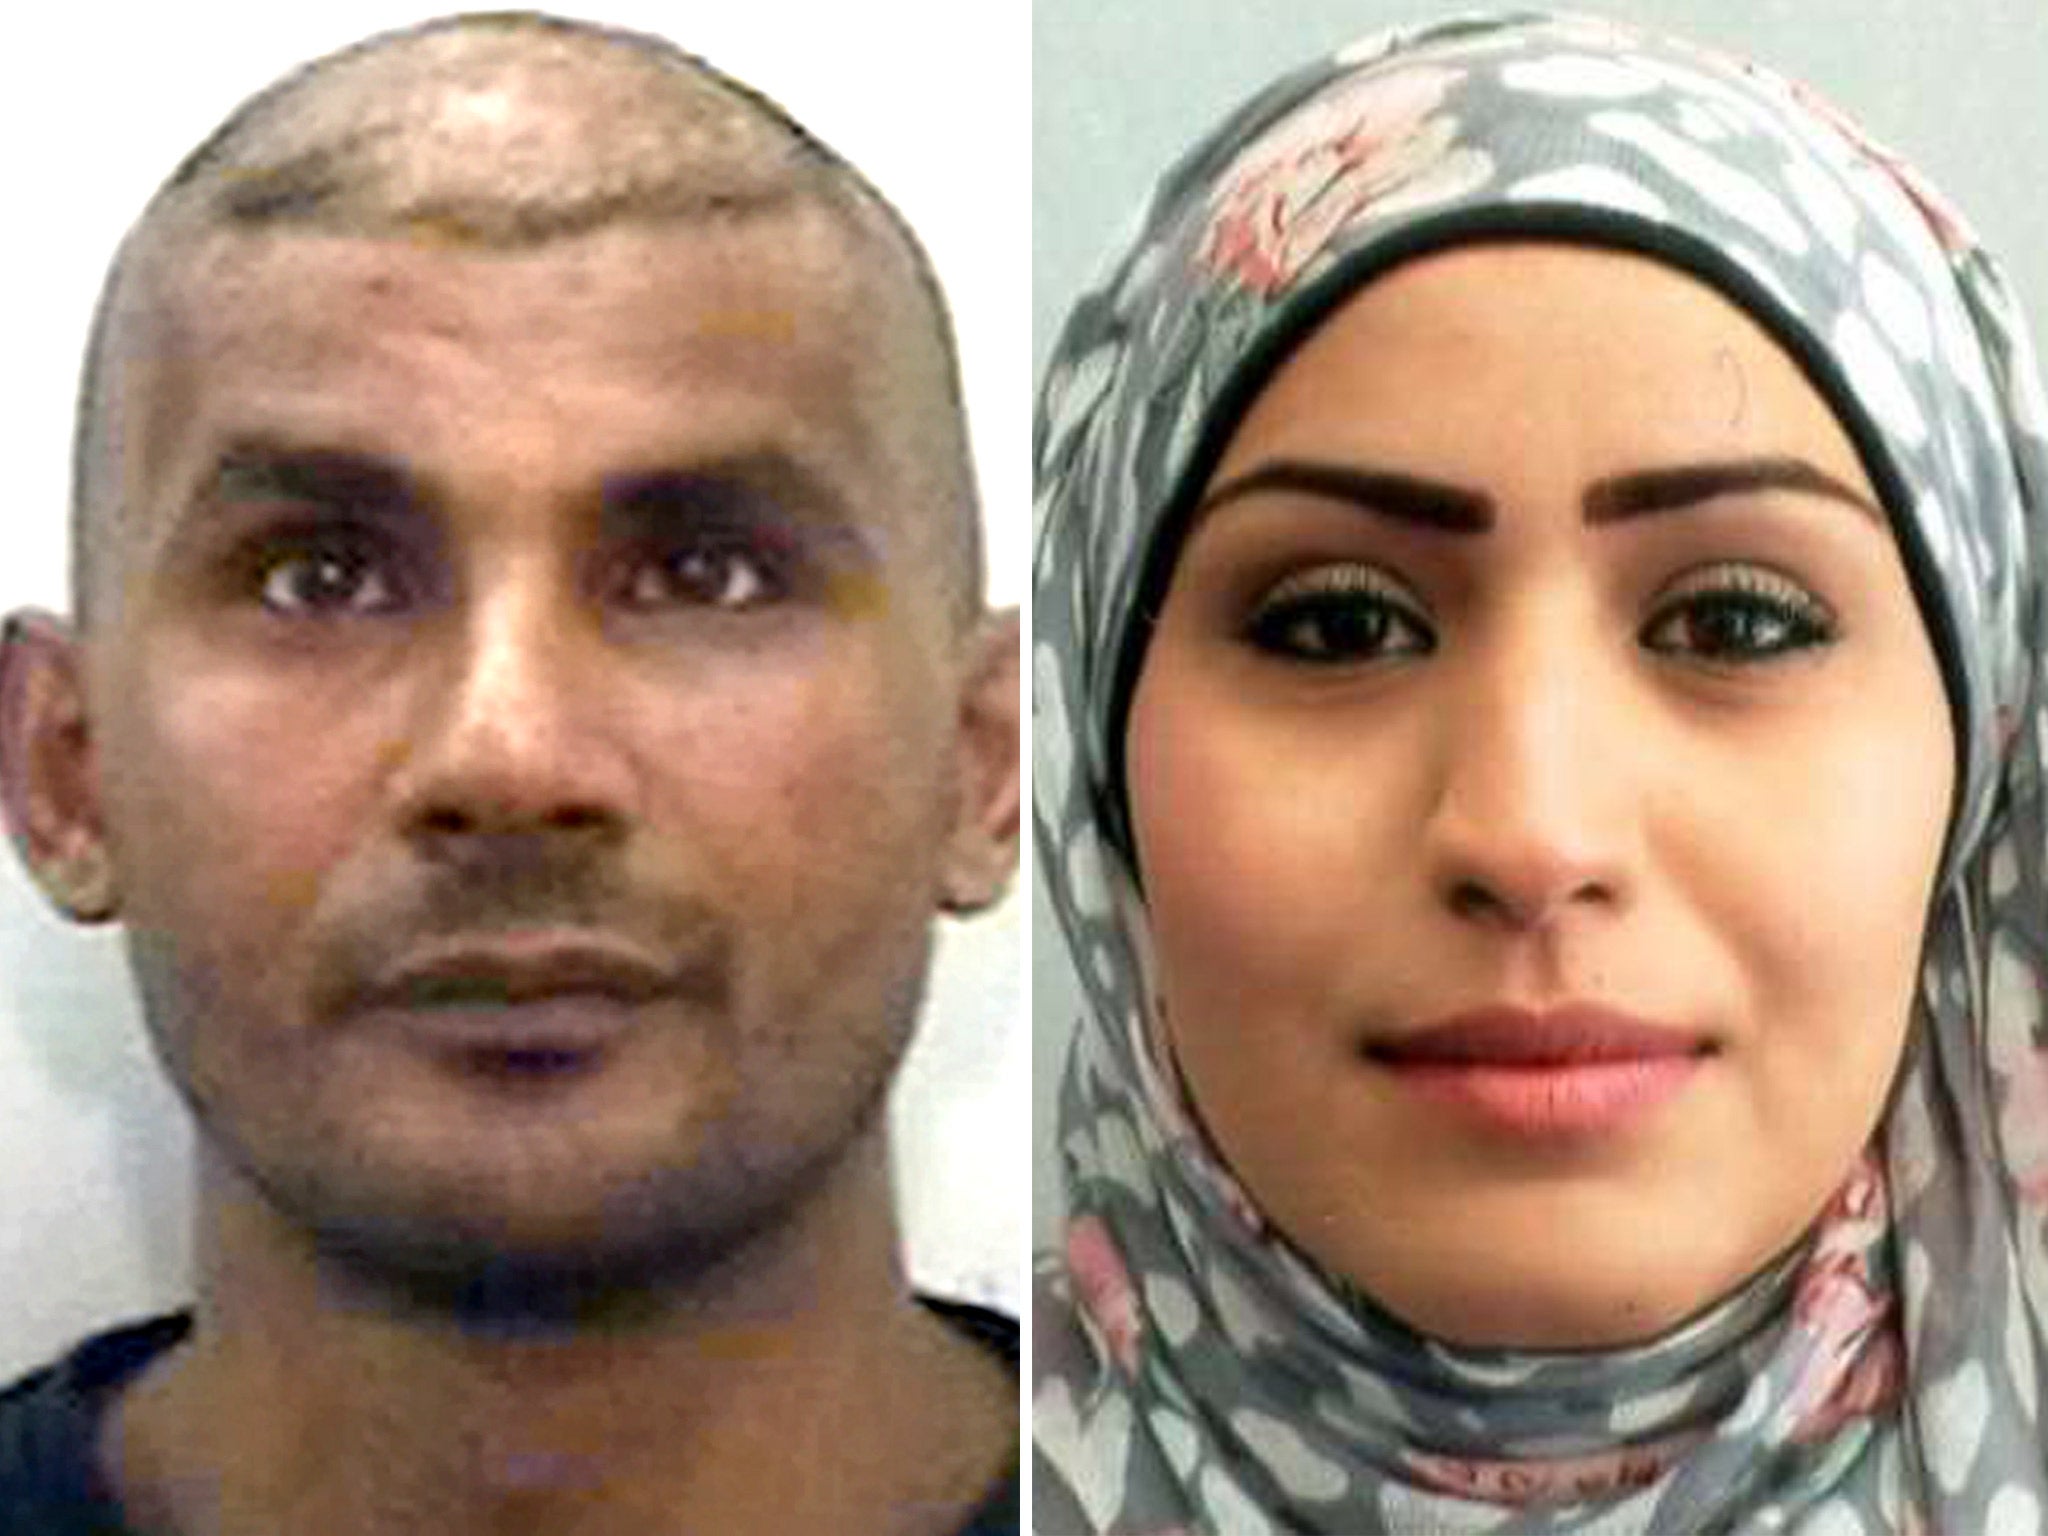 Ahmed Al-Khatib has been jailed for a minimum of 20 years for the murder of his wife Rania Alayed